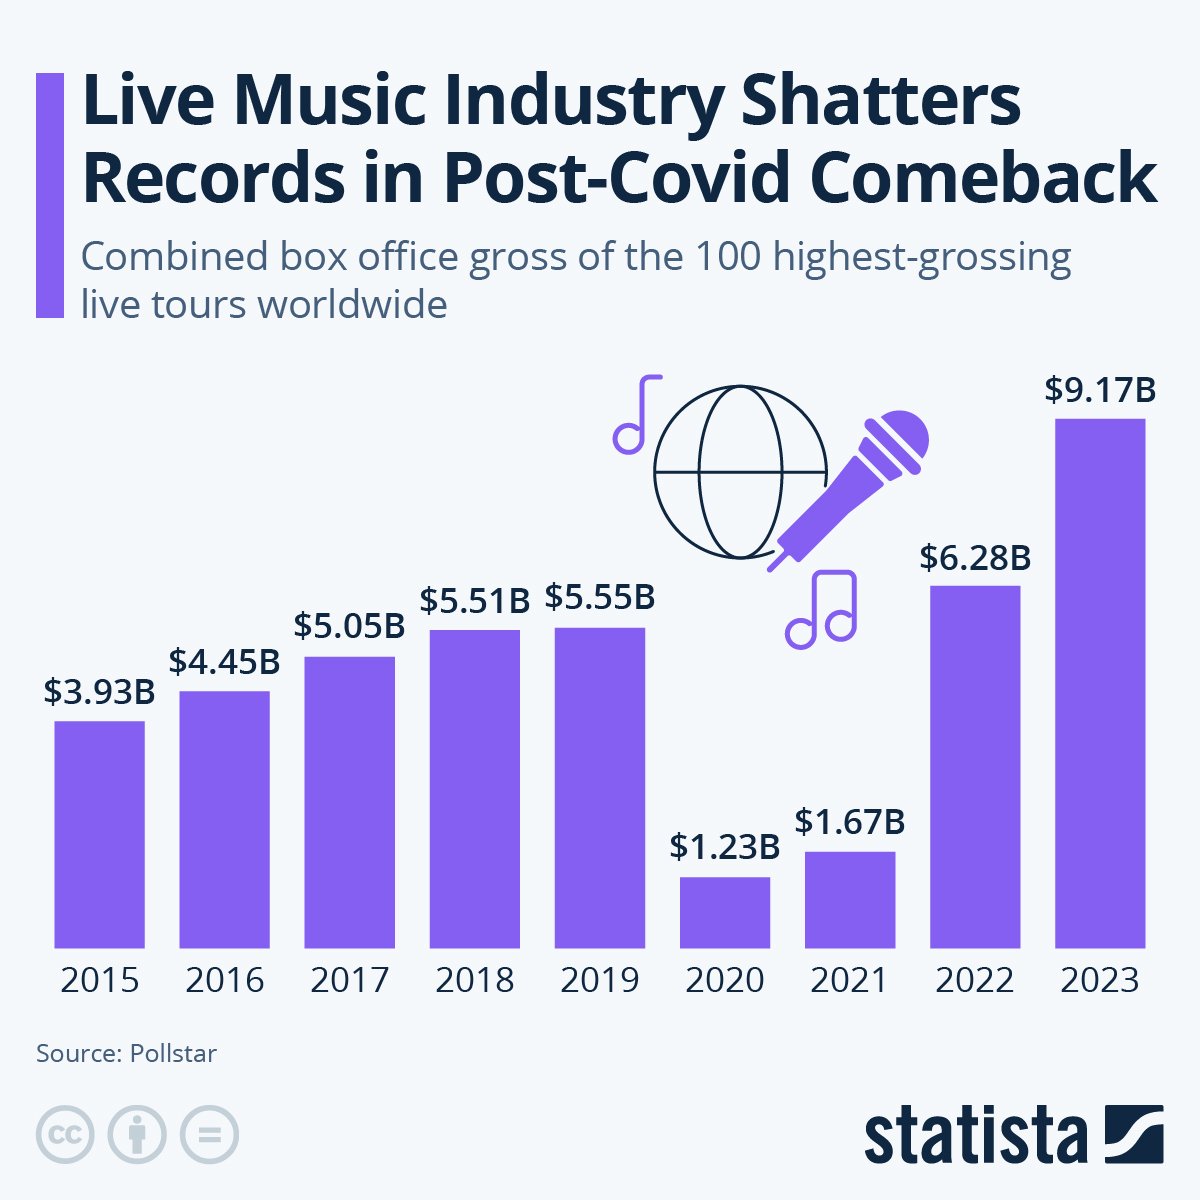 We're so back ... per @Pollstar the 100 largest music tours of 2023 grossed more than $9 billion, exceeding the previous record in 2022 by nearly 50% ... big boost from the Taylor Swift, Beyoncé, and Bruce Springsteen tours - @StatistaCharts cc @carlquintanilla